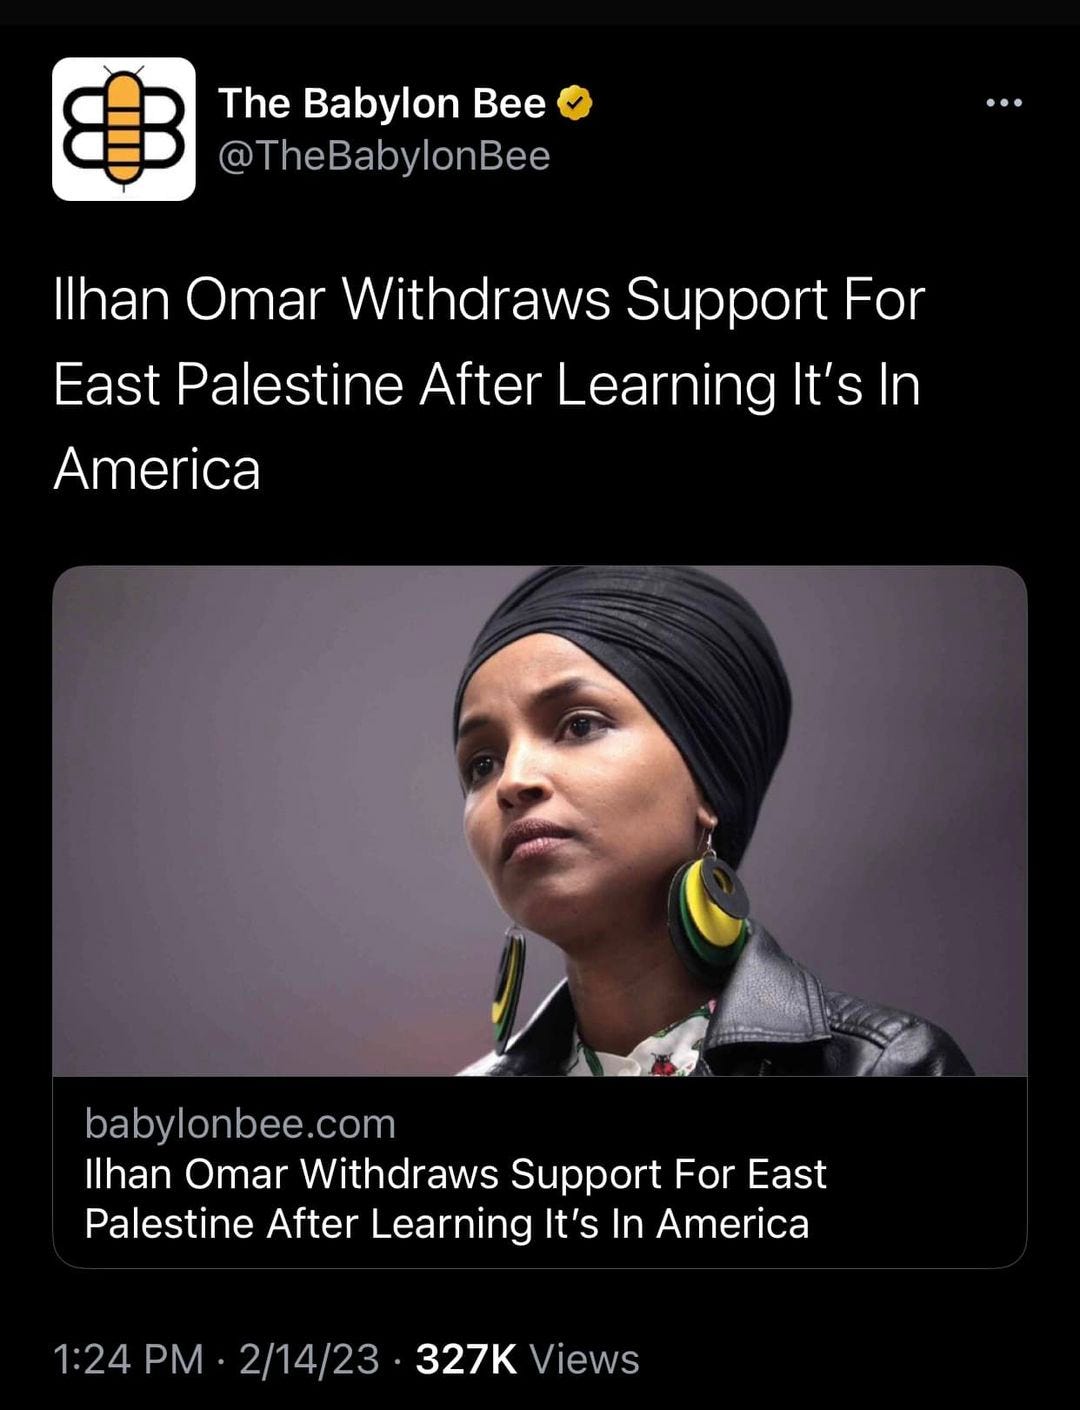 May be an image of 1 person and text that says 'The Babylon Bee @TheBabylonBee Ilhan O”ar Withdraws Support For East Palestine After Learning It's In America babylonbee.com Ilhan Omar Withdraws Support For East Palestine After Learning It's In America 1:24 PM 2/14/23 327K Views'